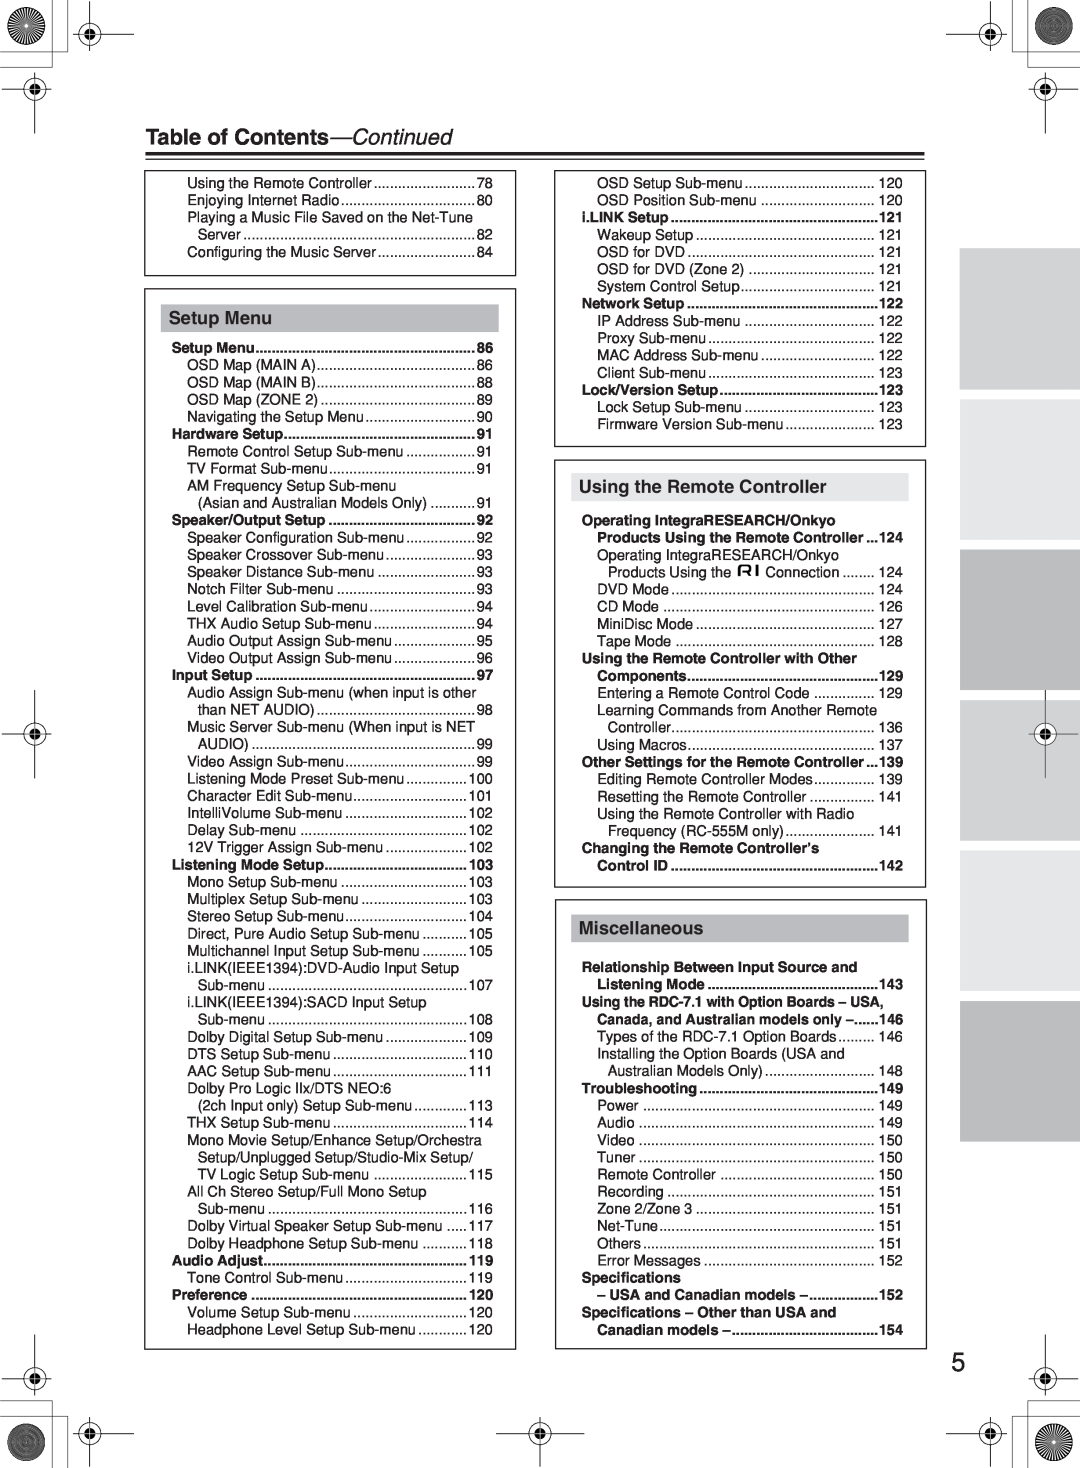 Integra RDC-7.1 instruction manual Table of Contents—Continued, Setup Menu, Using the Remote Controller, Miscellaneous 